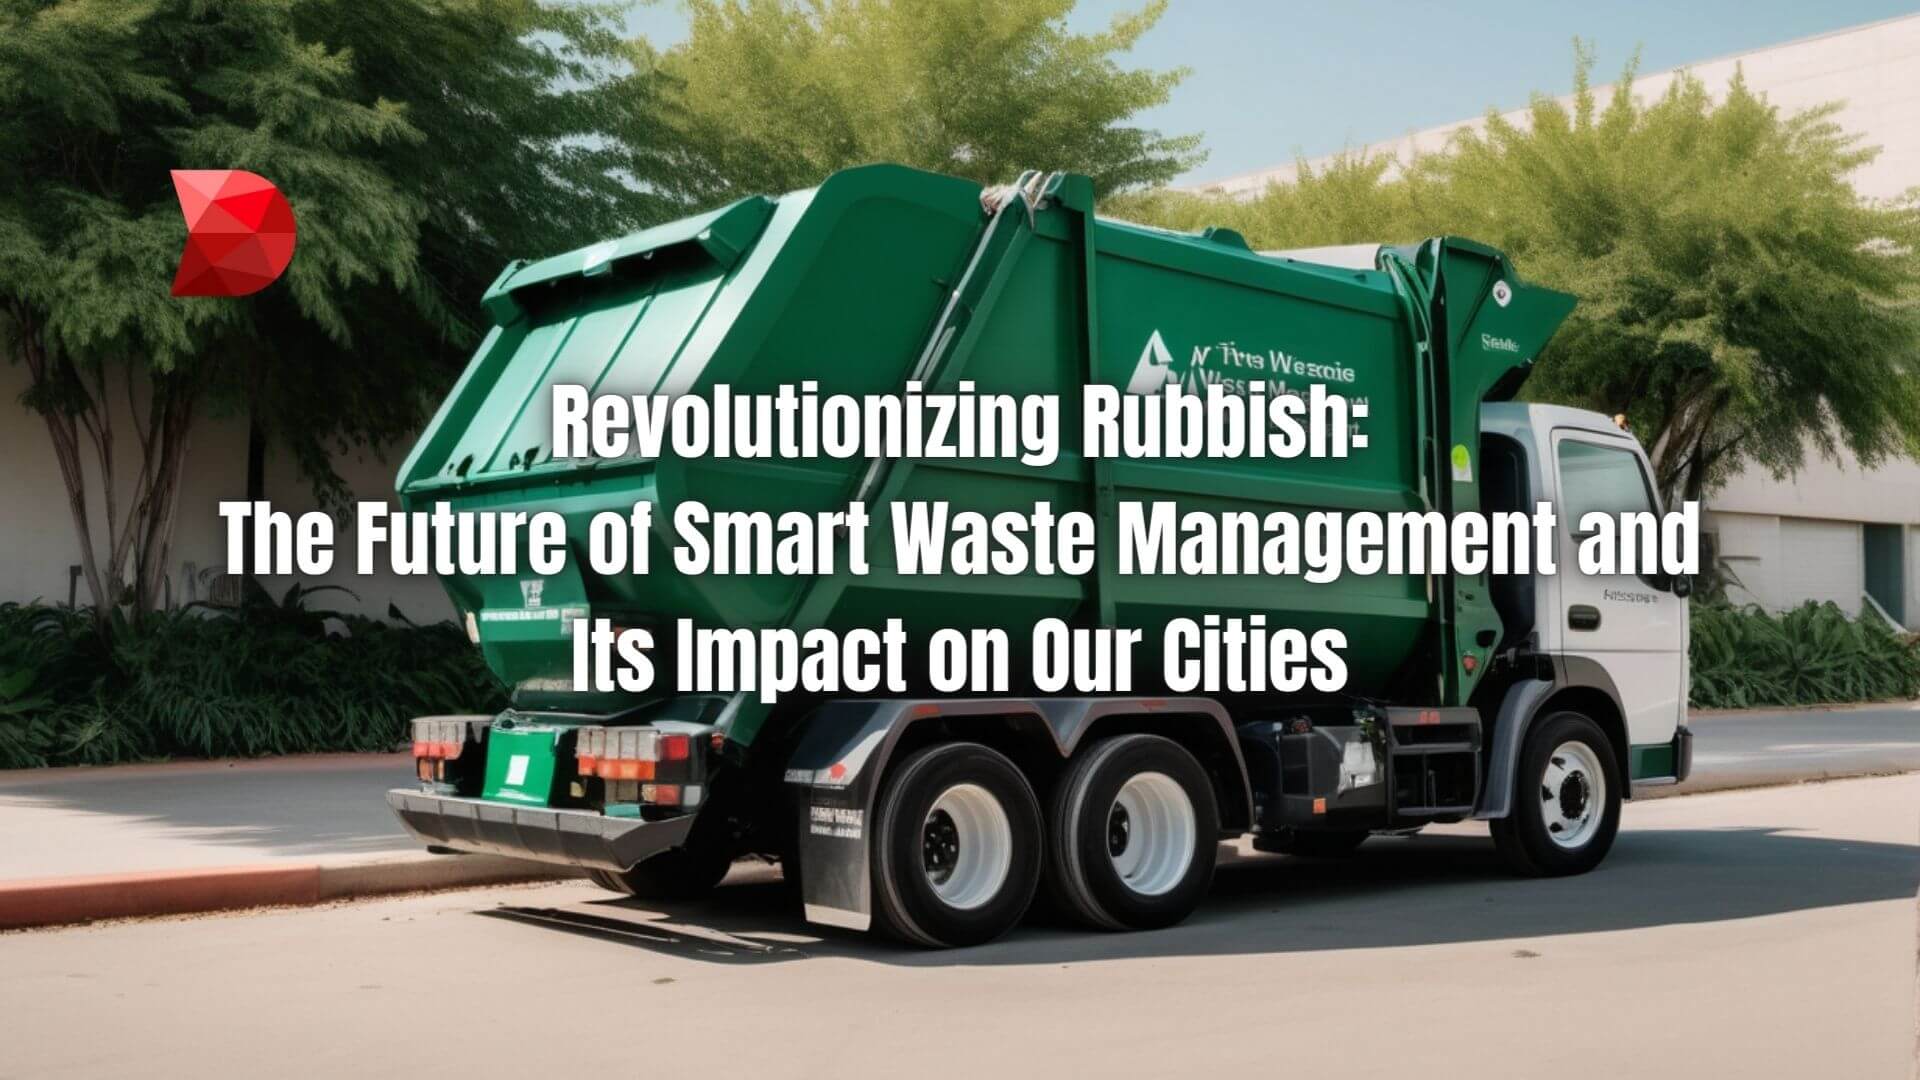 Discover how smart waste management shapes cities! Click here to explore the future impact in this comprehensive guide.